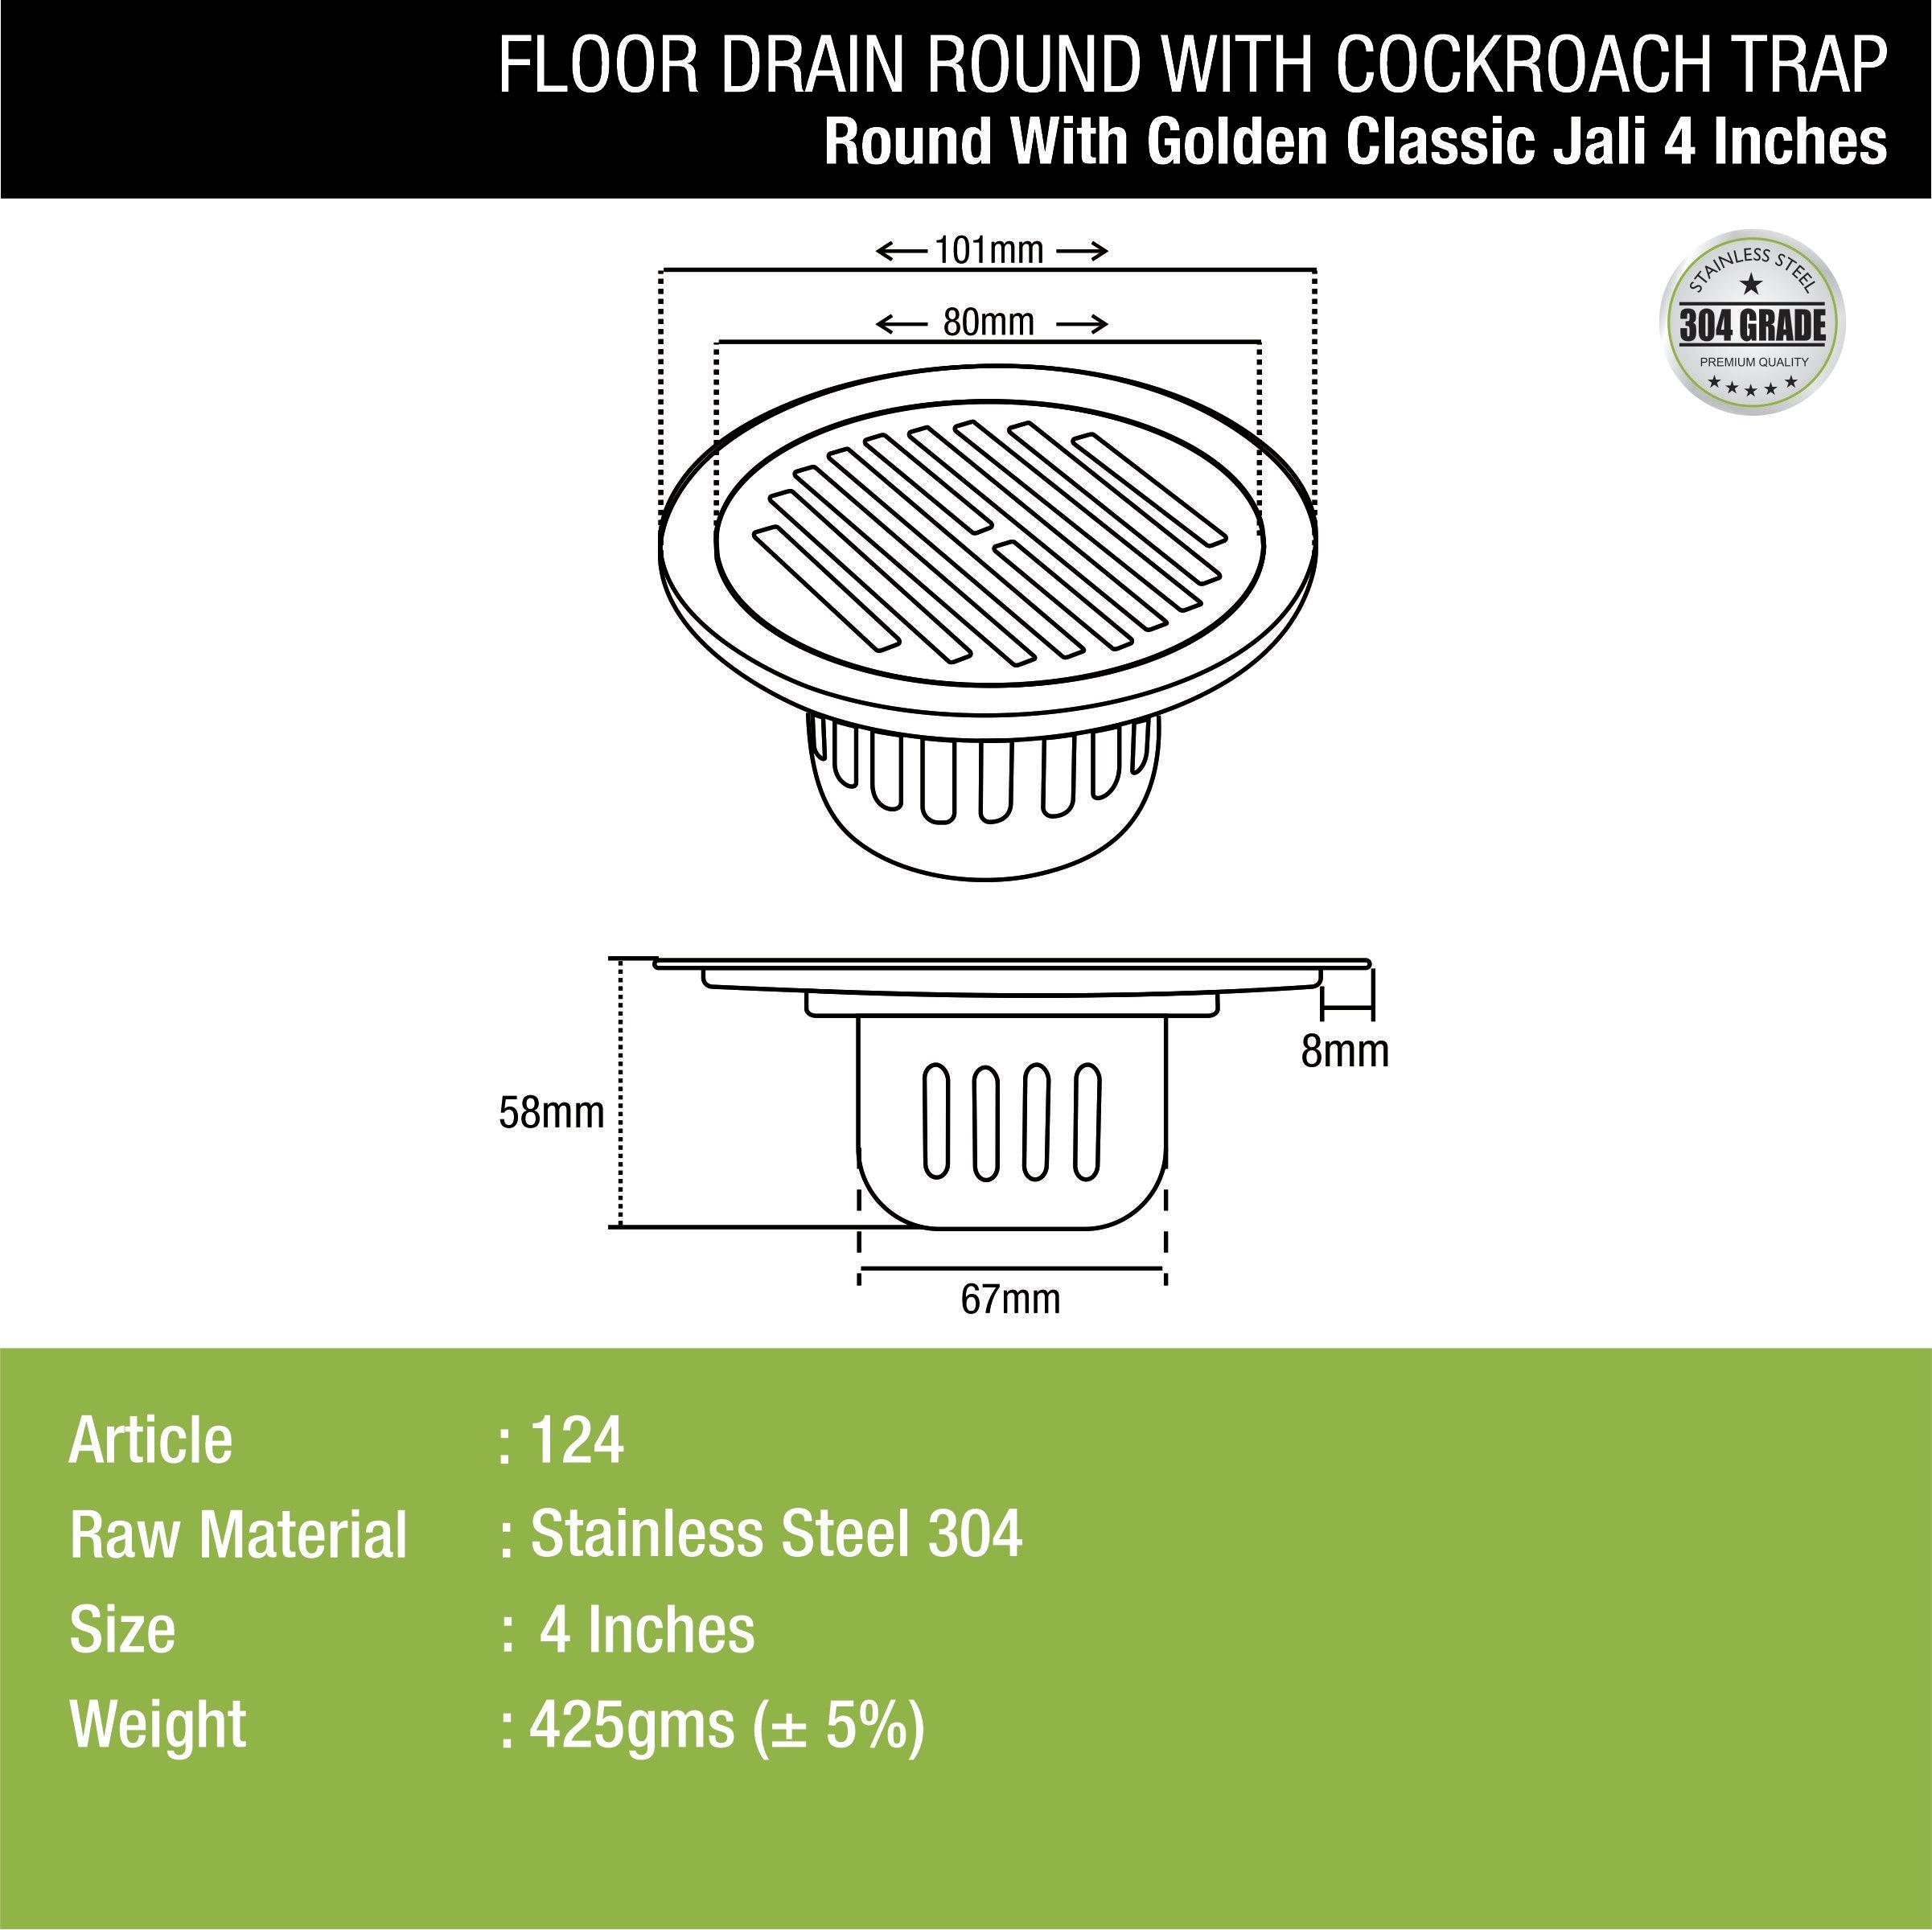 Golden Classic Jali Round Floor Drain (4 Inches) with Cockroach Trap dimensions and sizes